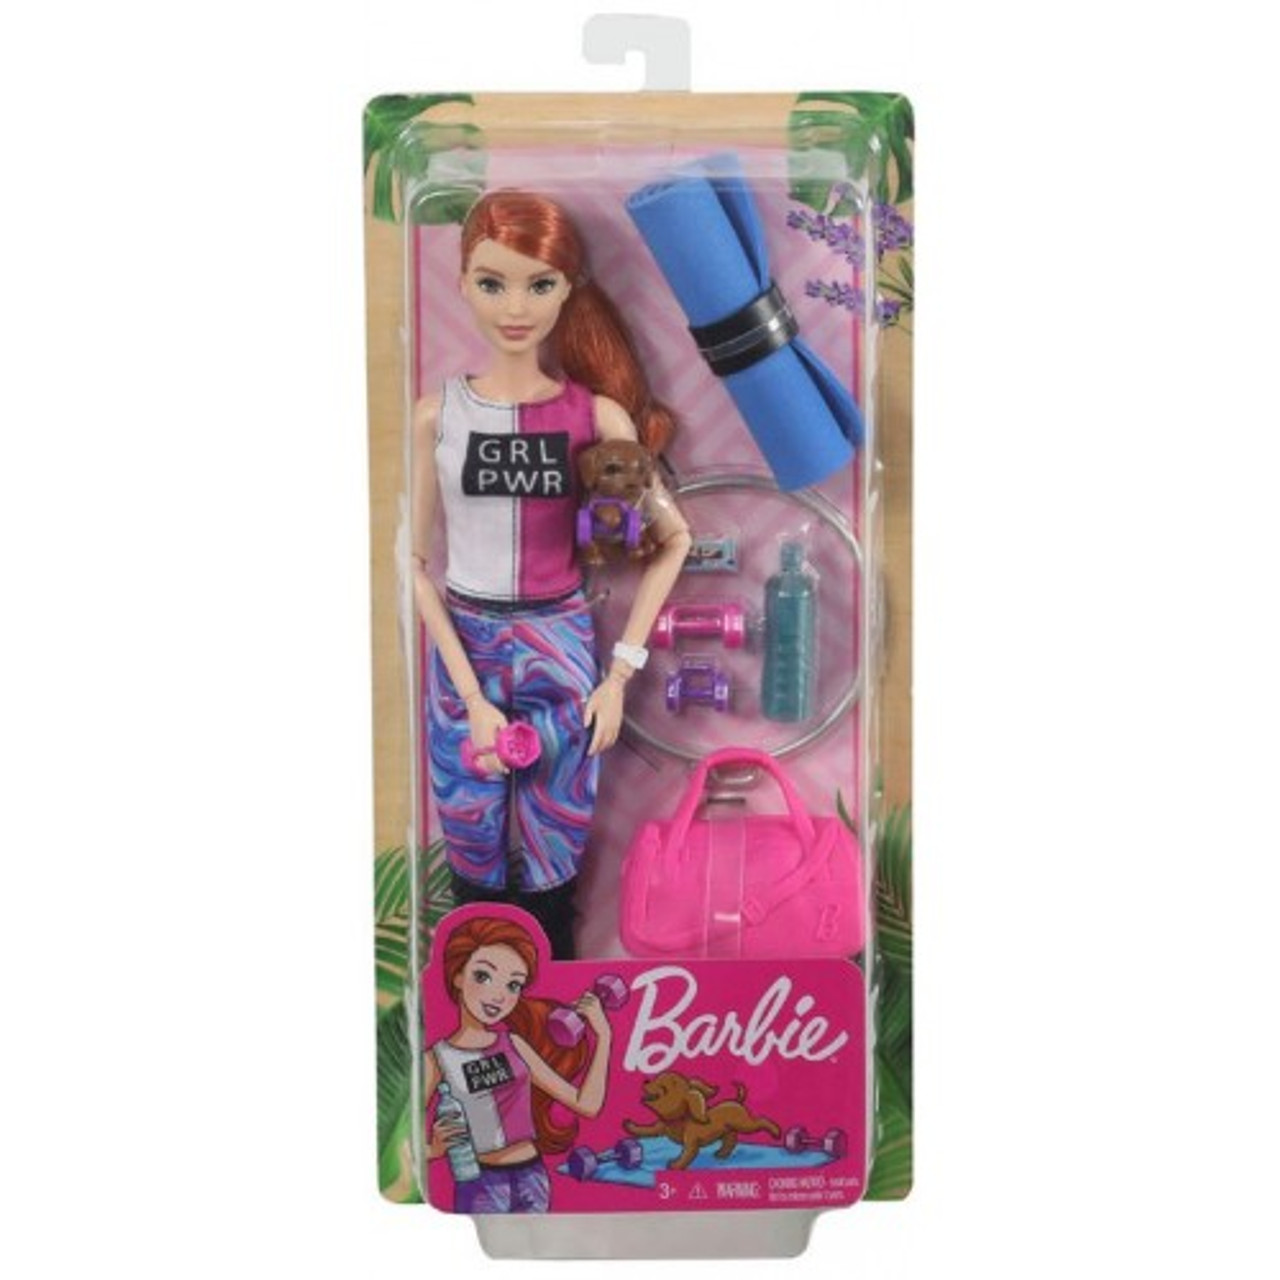 BARBIE WELLNESS DOLL WITH PUPPY